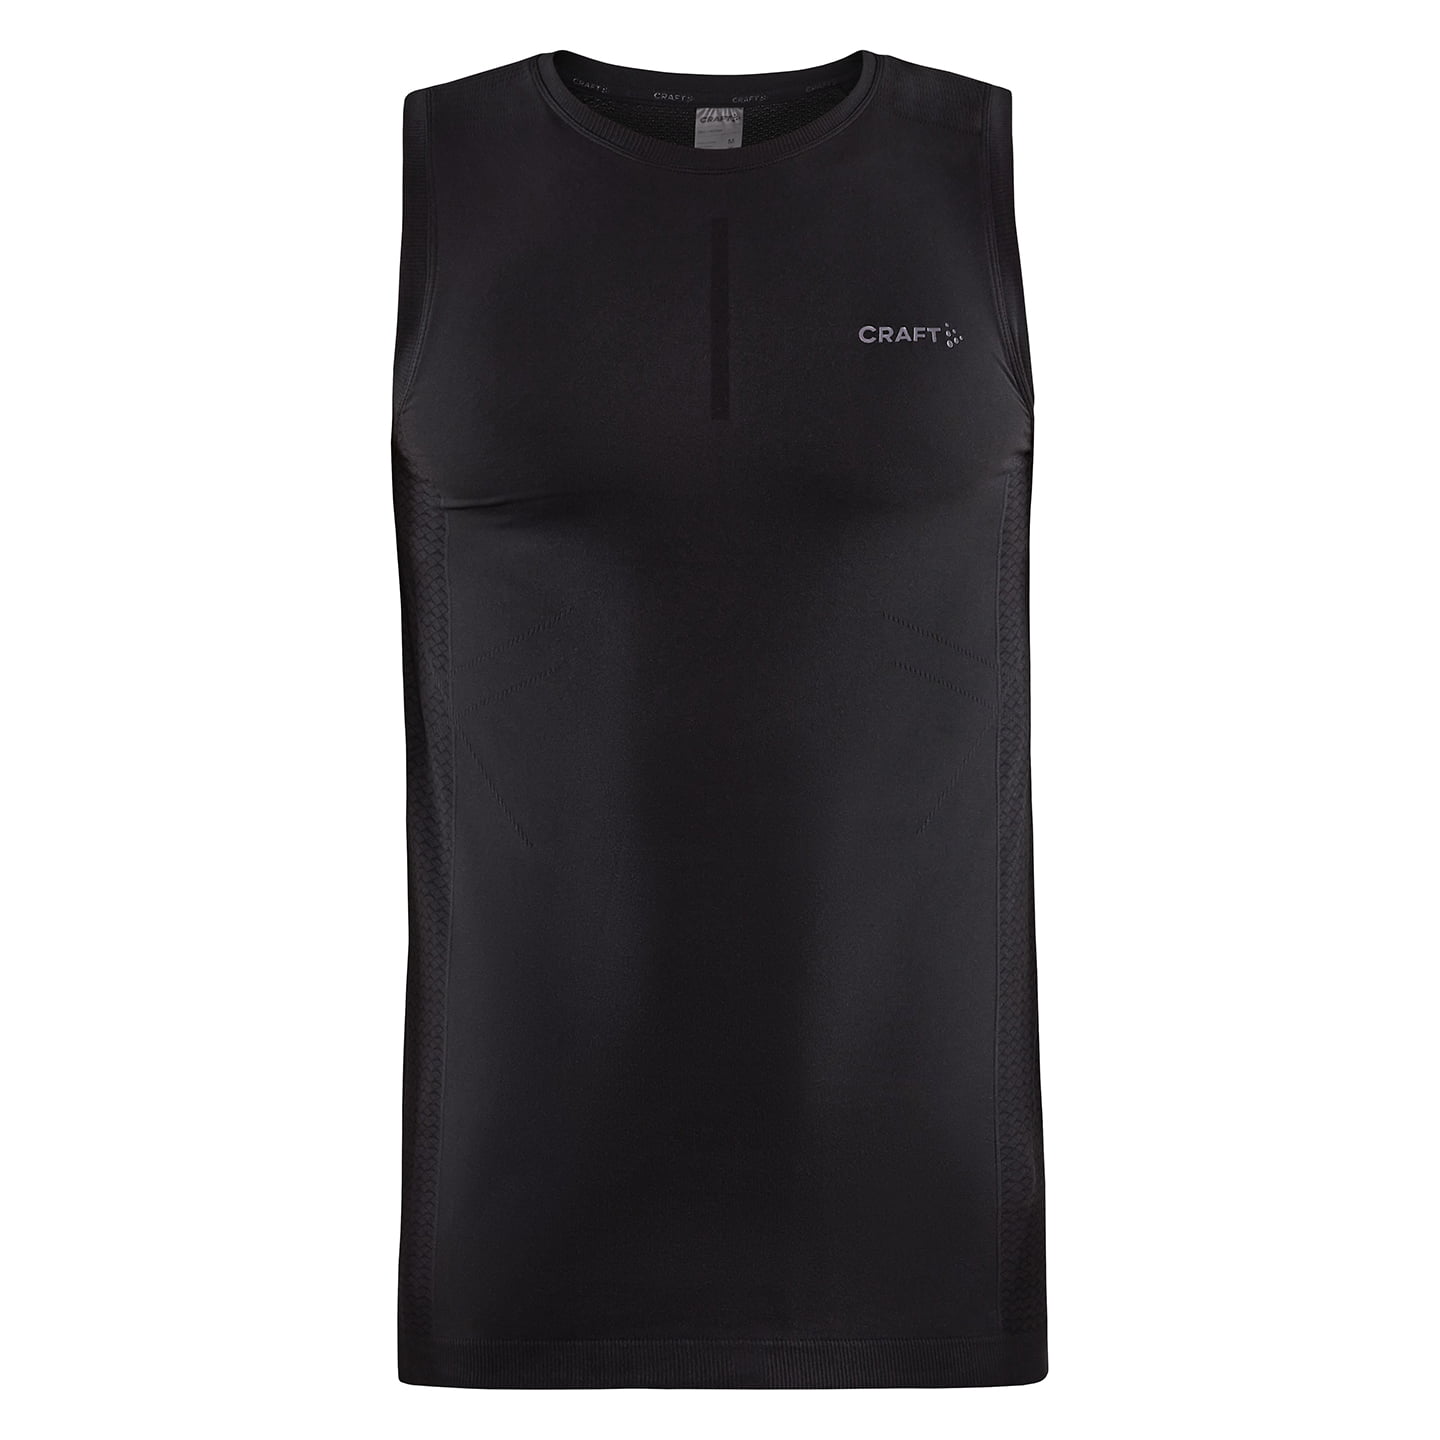 CRAFT Intensity Sleeveless Cycling Base Layer Base Layer, for men, size XL